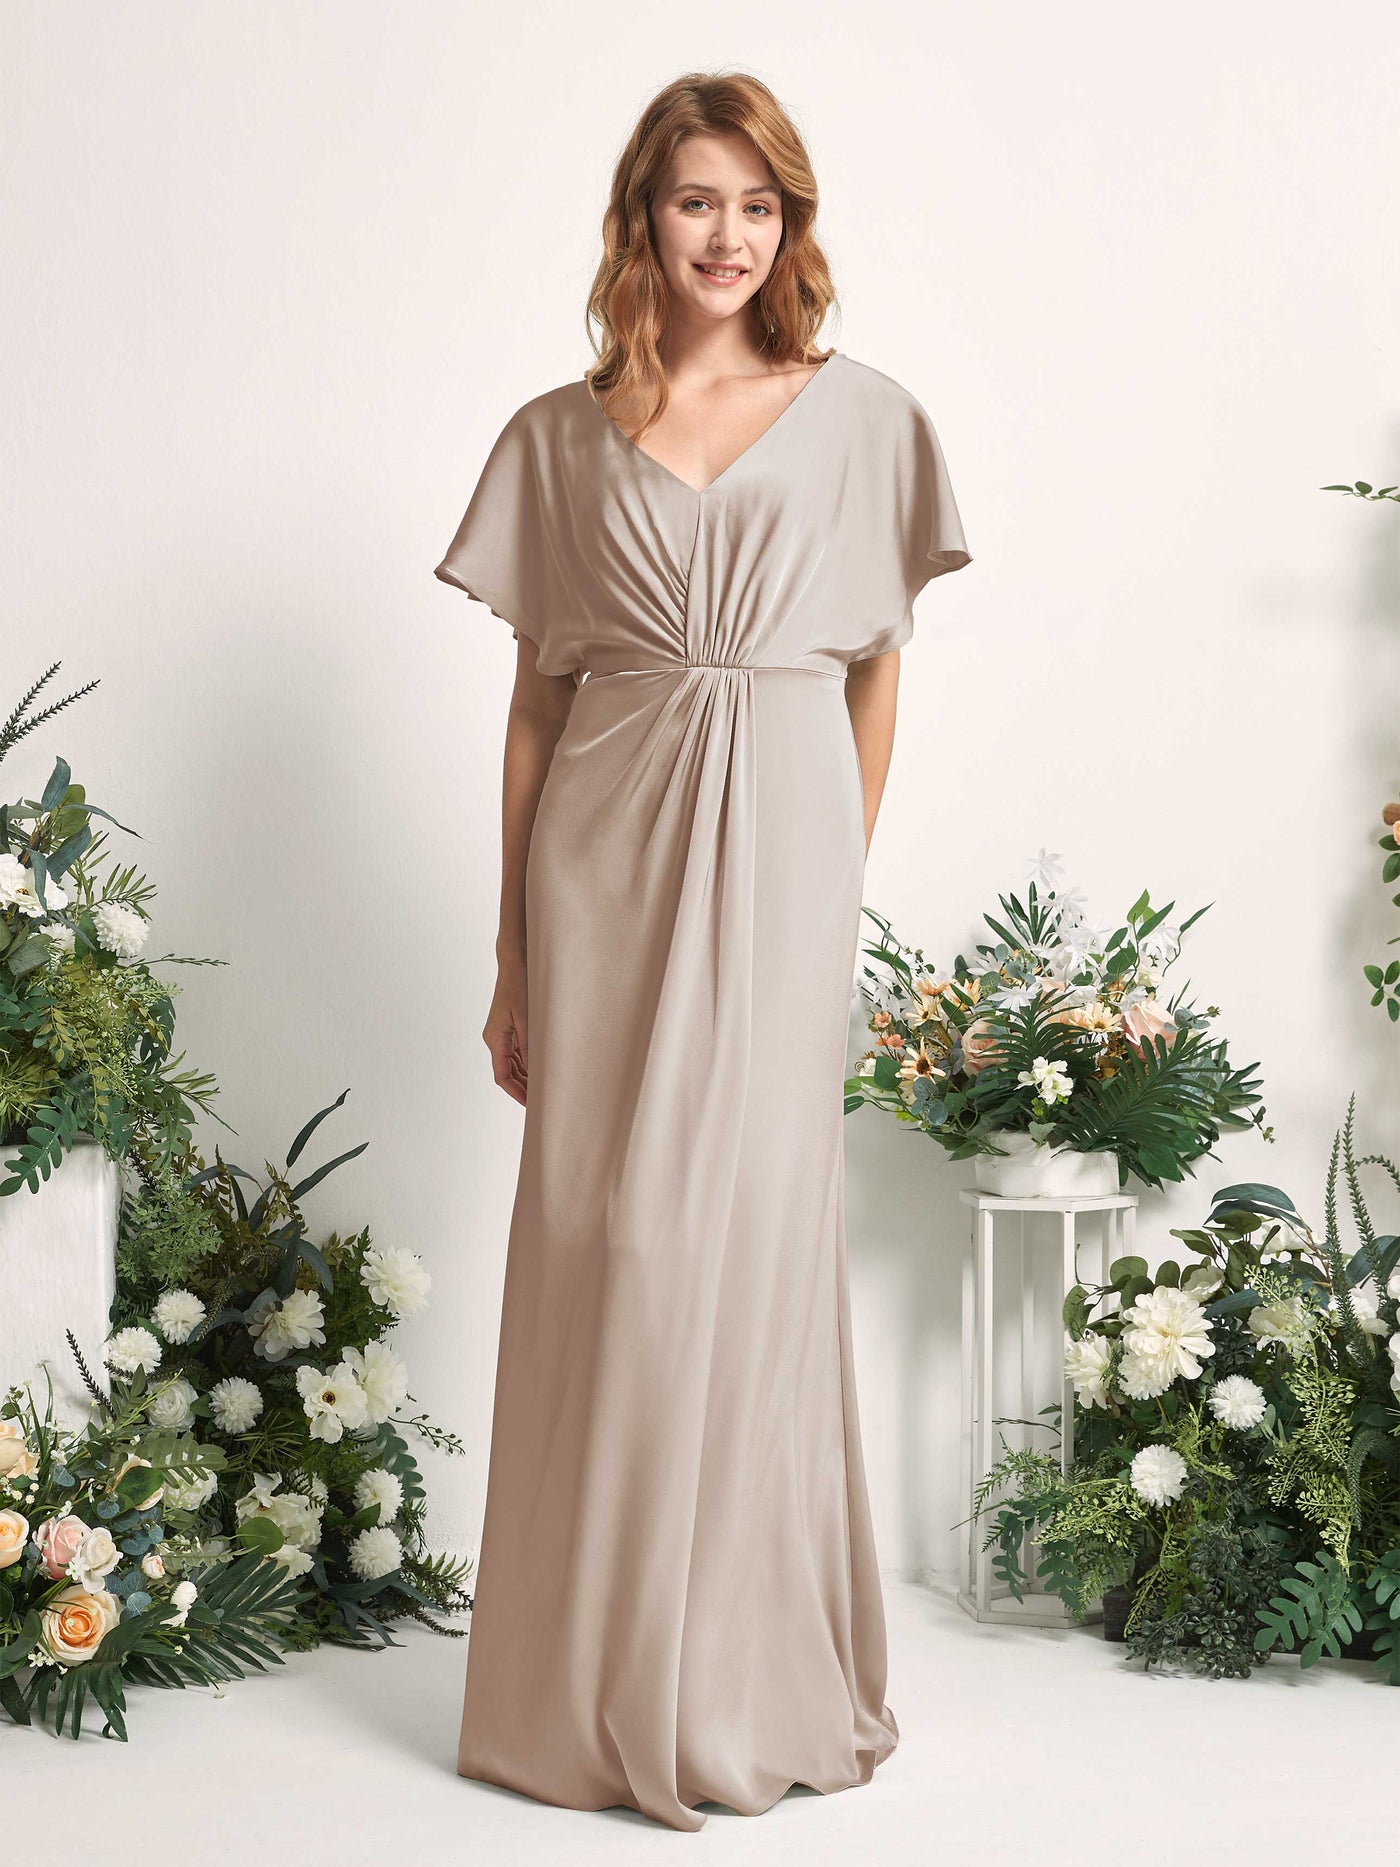 Taupe Bridesmaid Dresses Bridesmaid Dress A-line Satin V-neck Full Length Short Sleeves Wedding Party Dress (80225502)#color_taupe